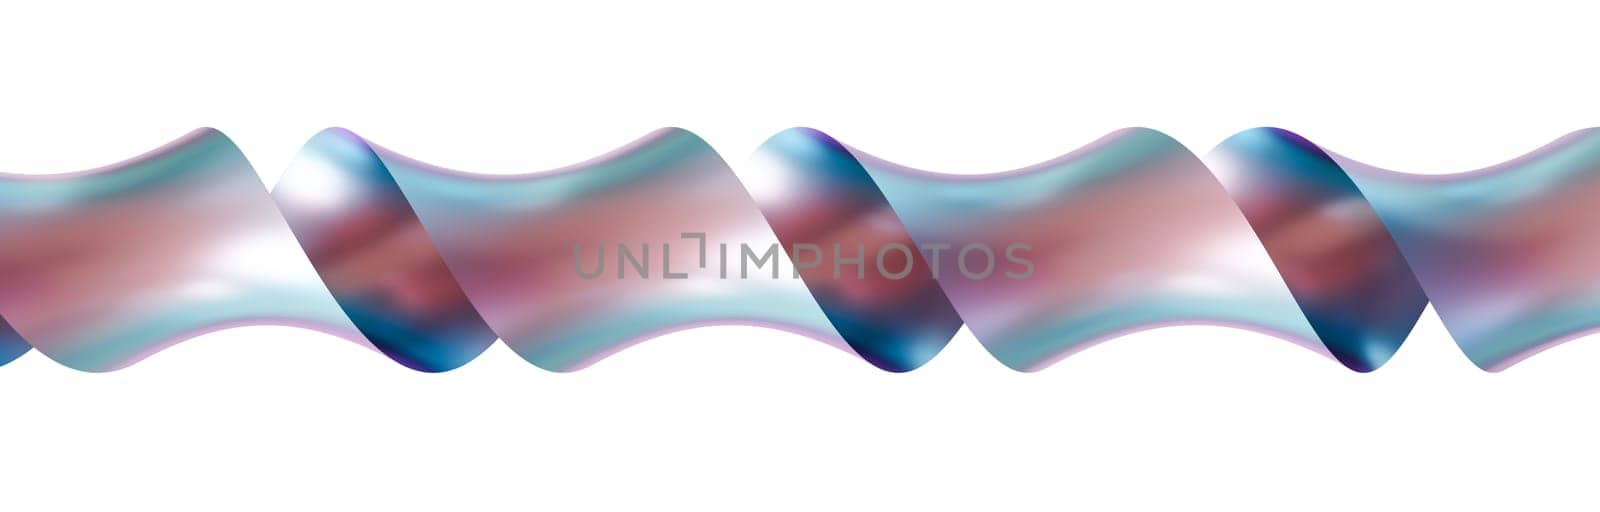 Abstract, holographic 3D shape isolated on white background. Metallic, iridescent surface. Color gradient, y2k style. Cut out trendy and futuristic design element. 3D rendering